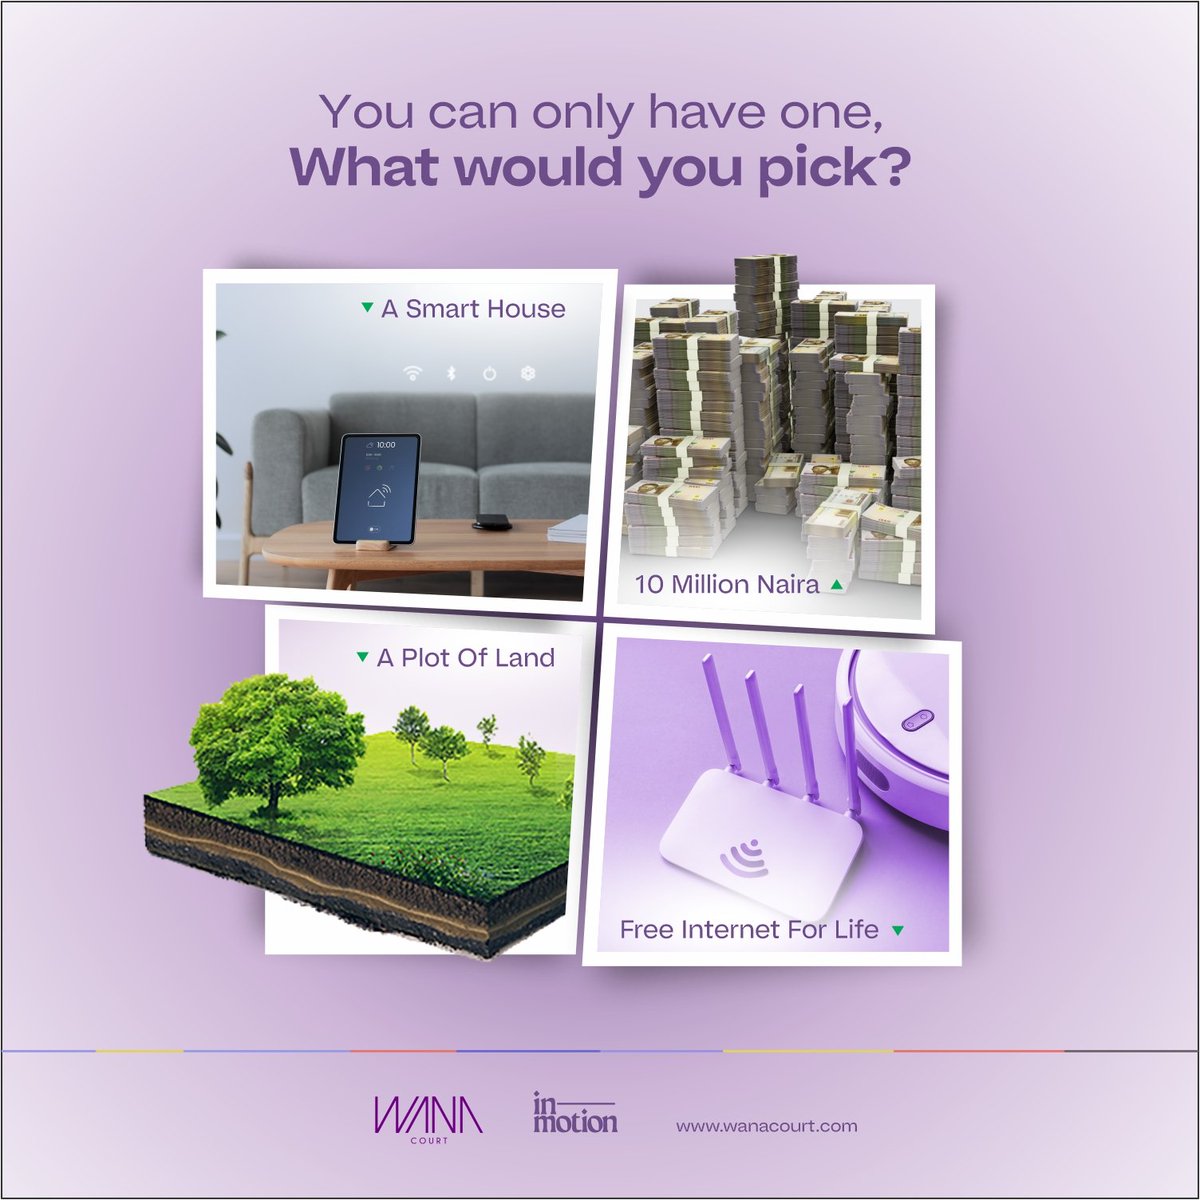 You can only have one, what would you pick?

picture 1: A Smart House
picture 2: 10 Million Naira
picture 3: A Plot of Land
picture 4: Free Internet for Life

#thisorthat
#wouldyourather
#realestate
#game
#thisorthatchallenge 
#challenge 
#realtor
#dreamhome 
#askquestions